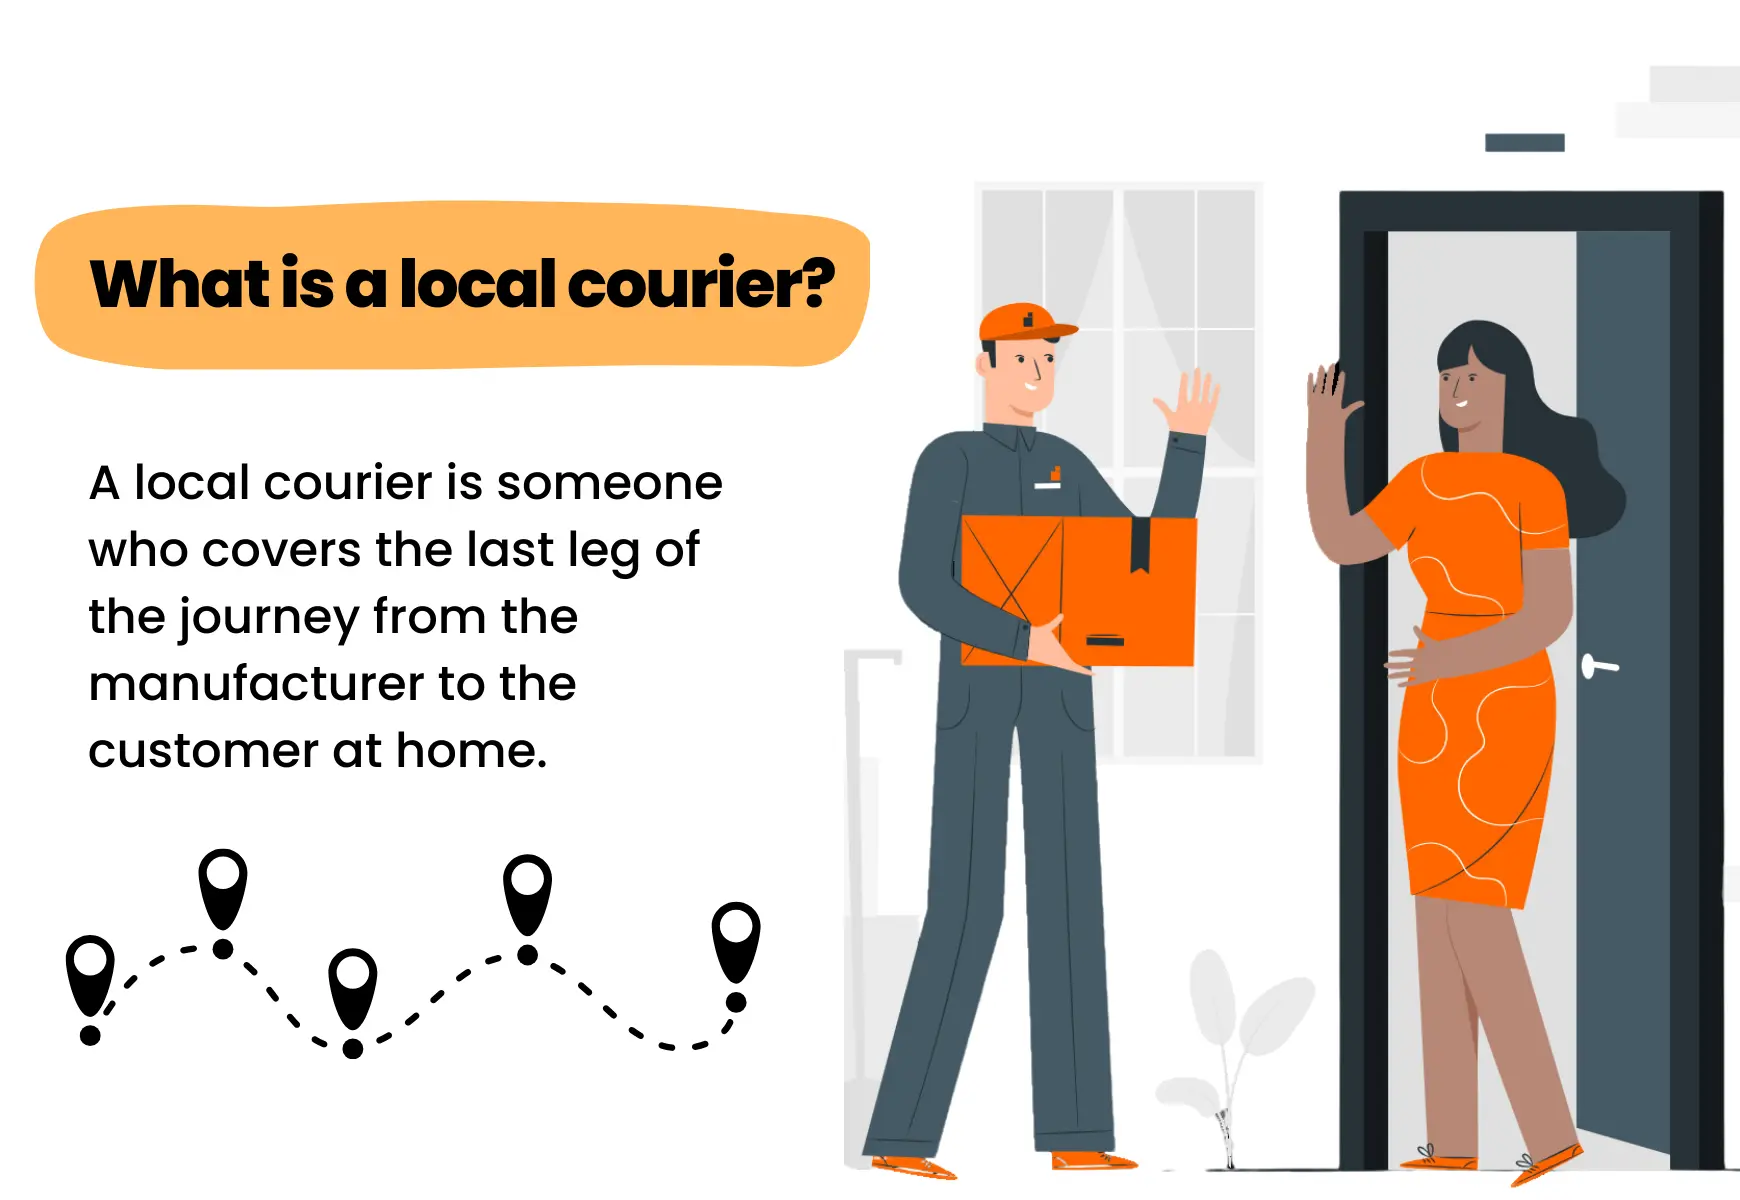 What is a local courier?